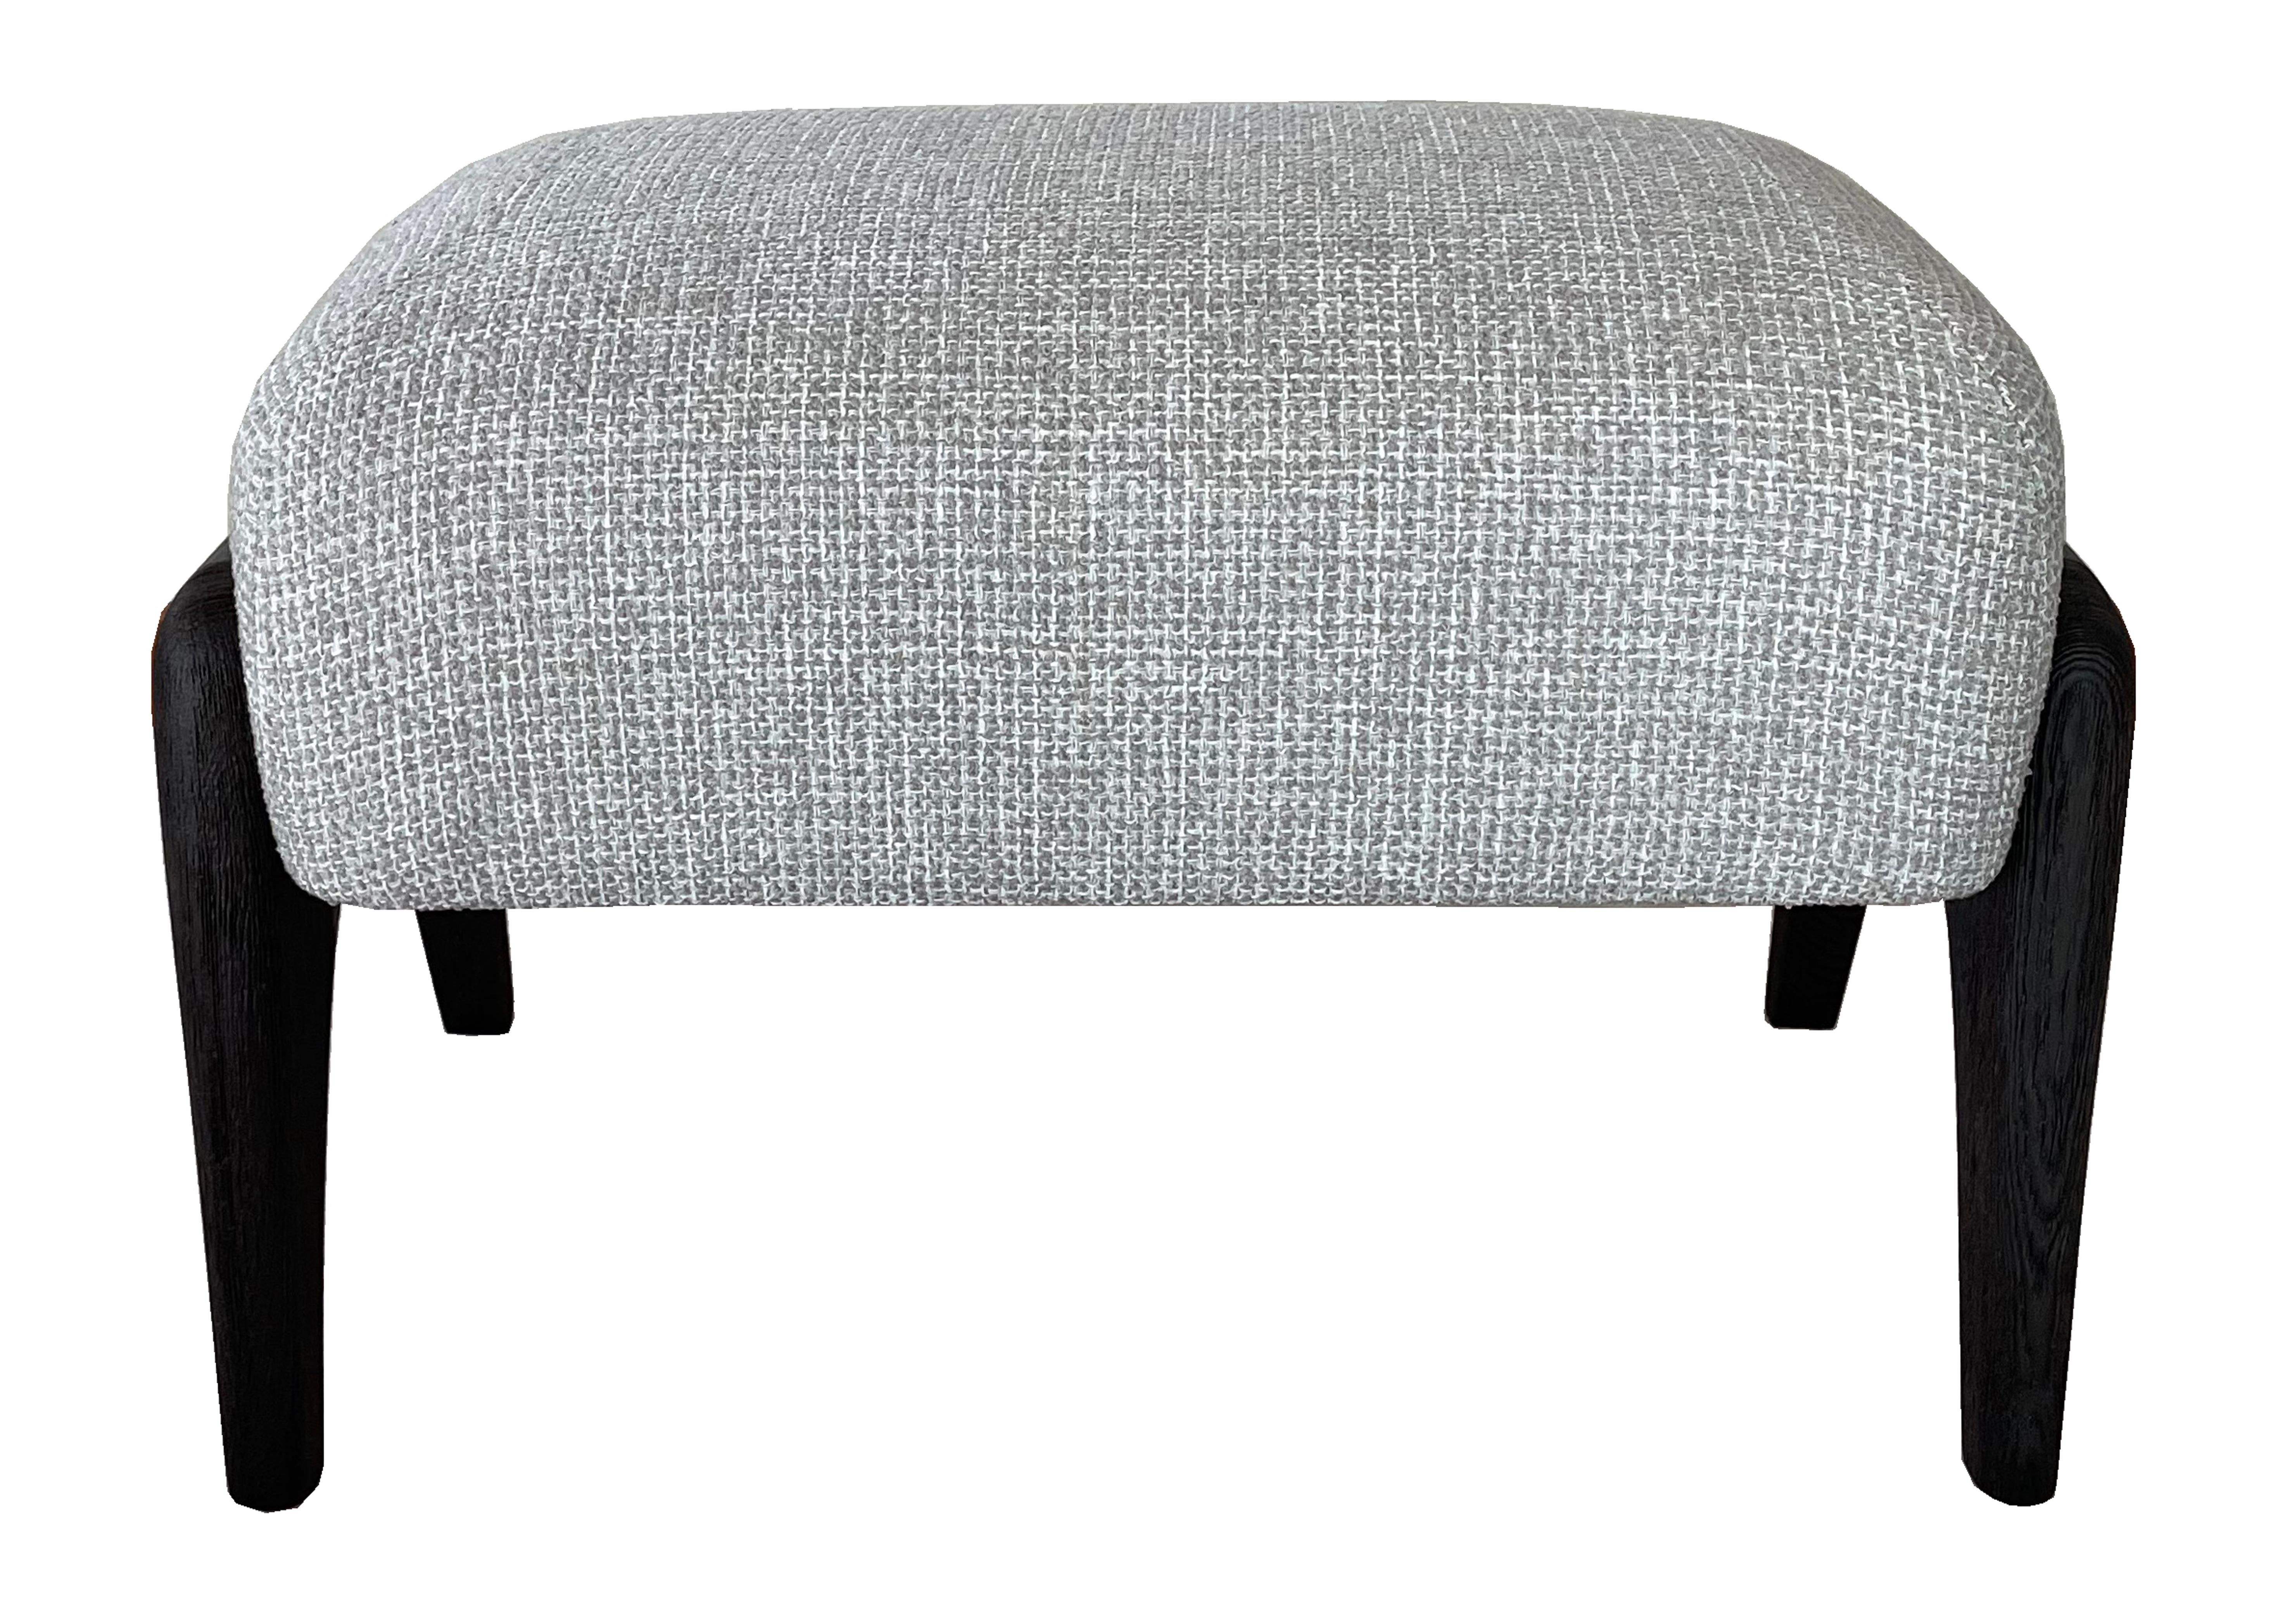 Description: Foot stool in Oak wood with Loro Piana fabric
Color: Charcoal and light grey
Size: 58 x 33 x 38 H cm
Material: Oak Wood and Loro Piana fabric
Collection: Art Déco Garden.